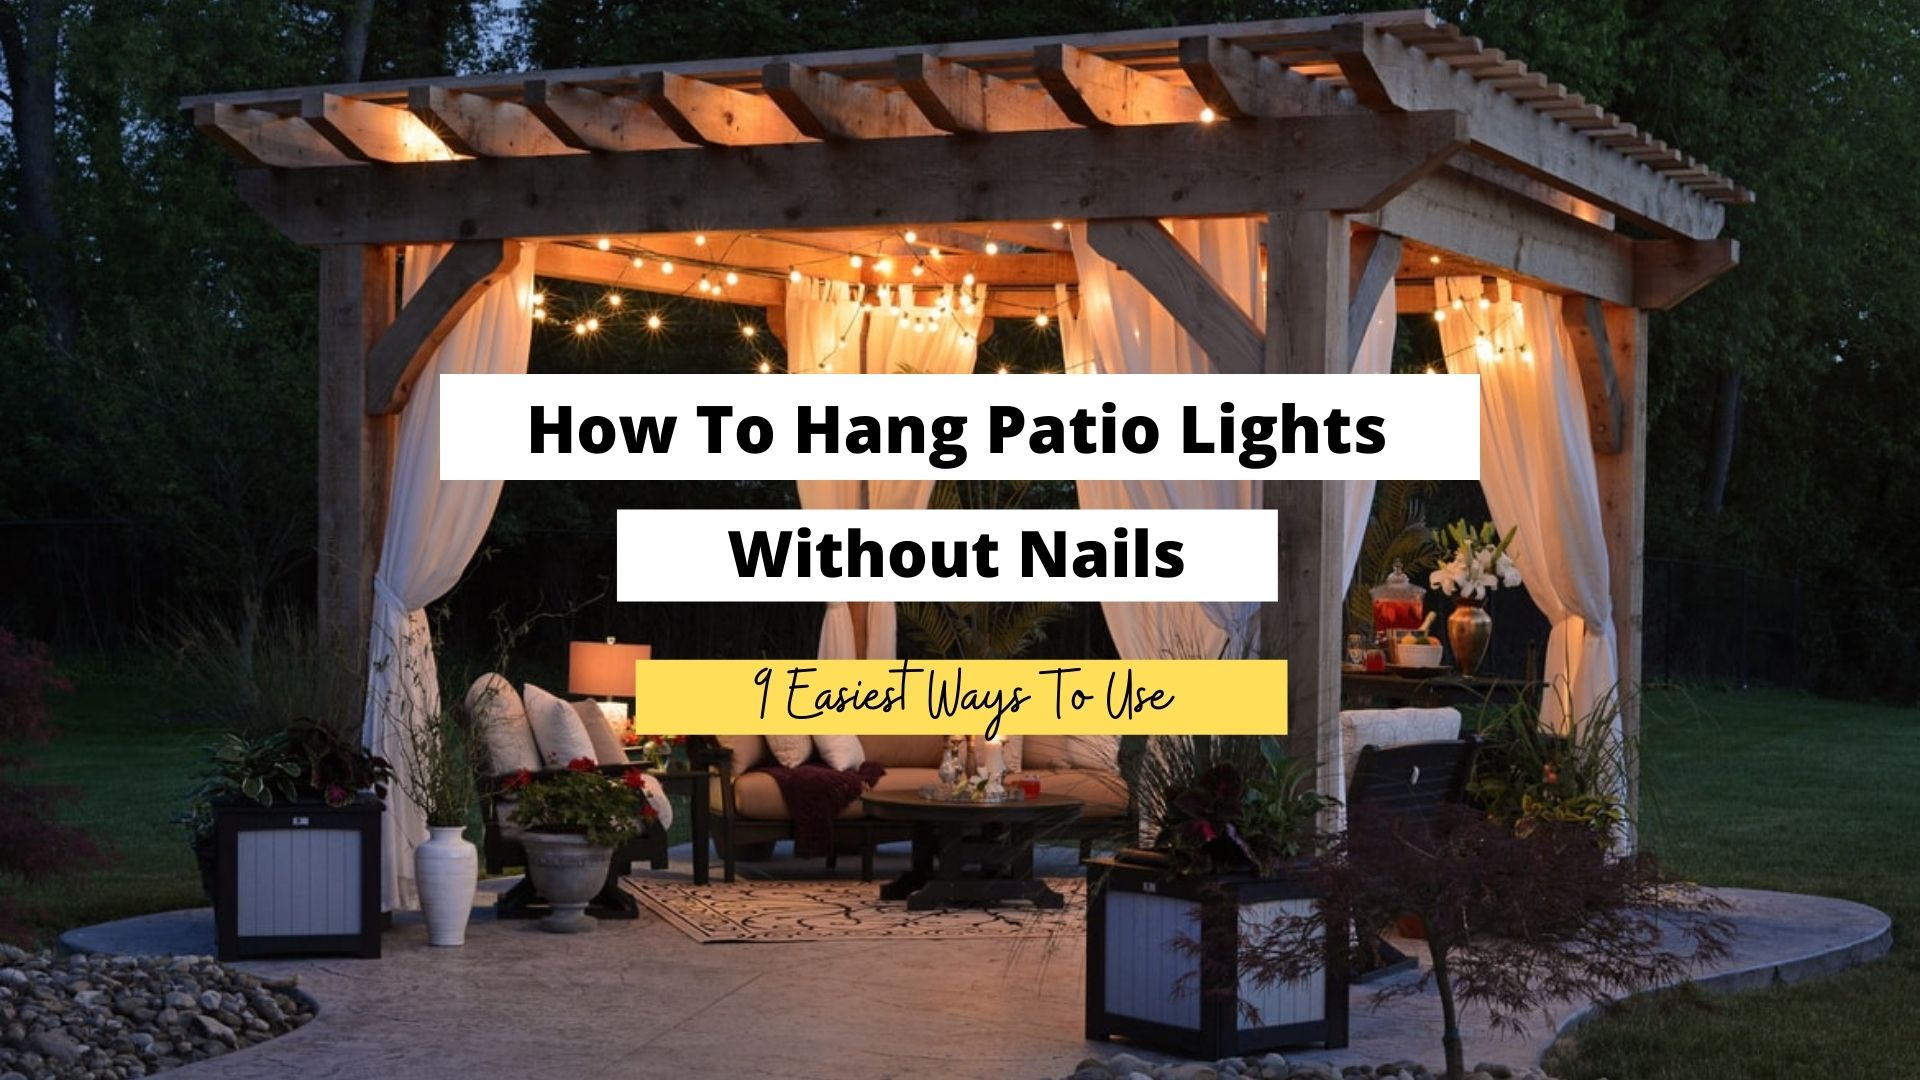 How To Hang Patio Lights Without Nails (9 Surefire Ways) - Craftsonfire